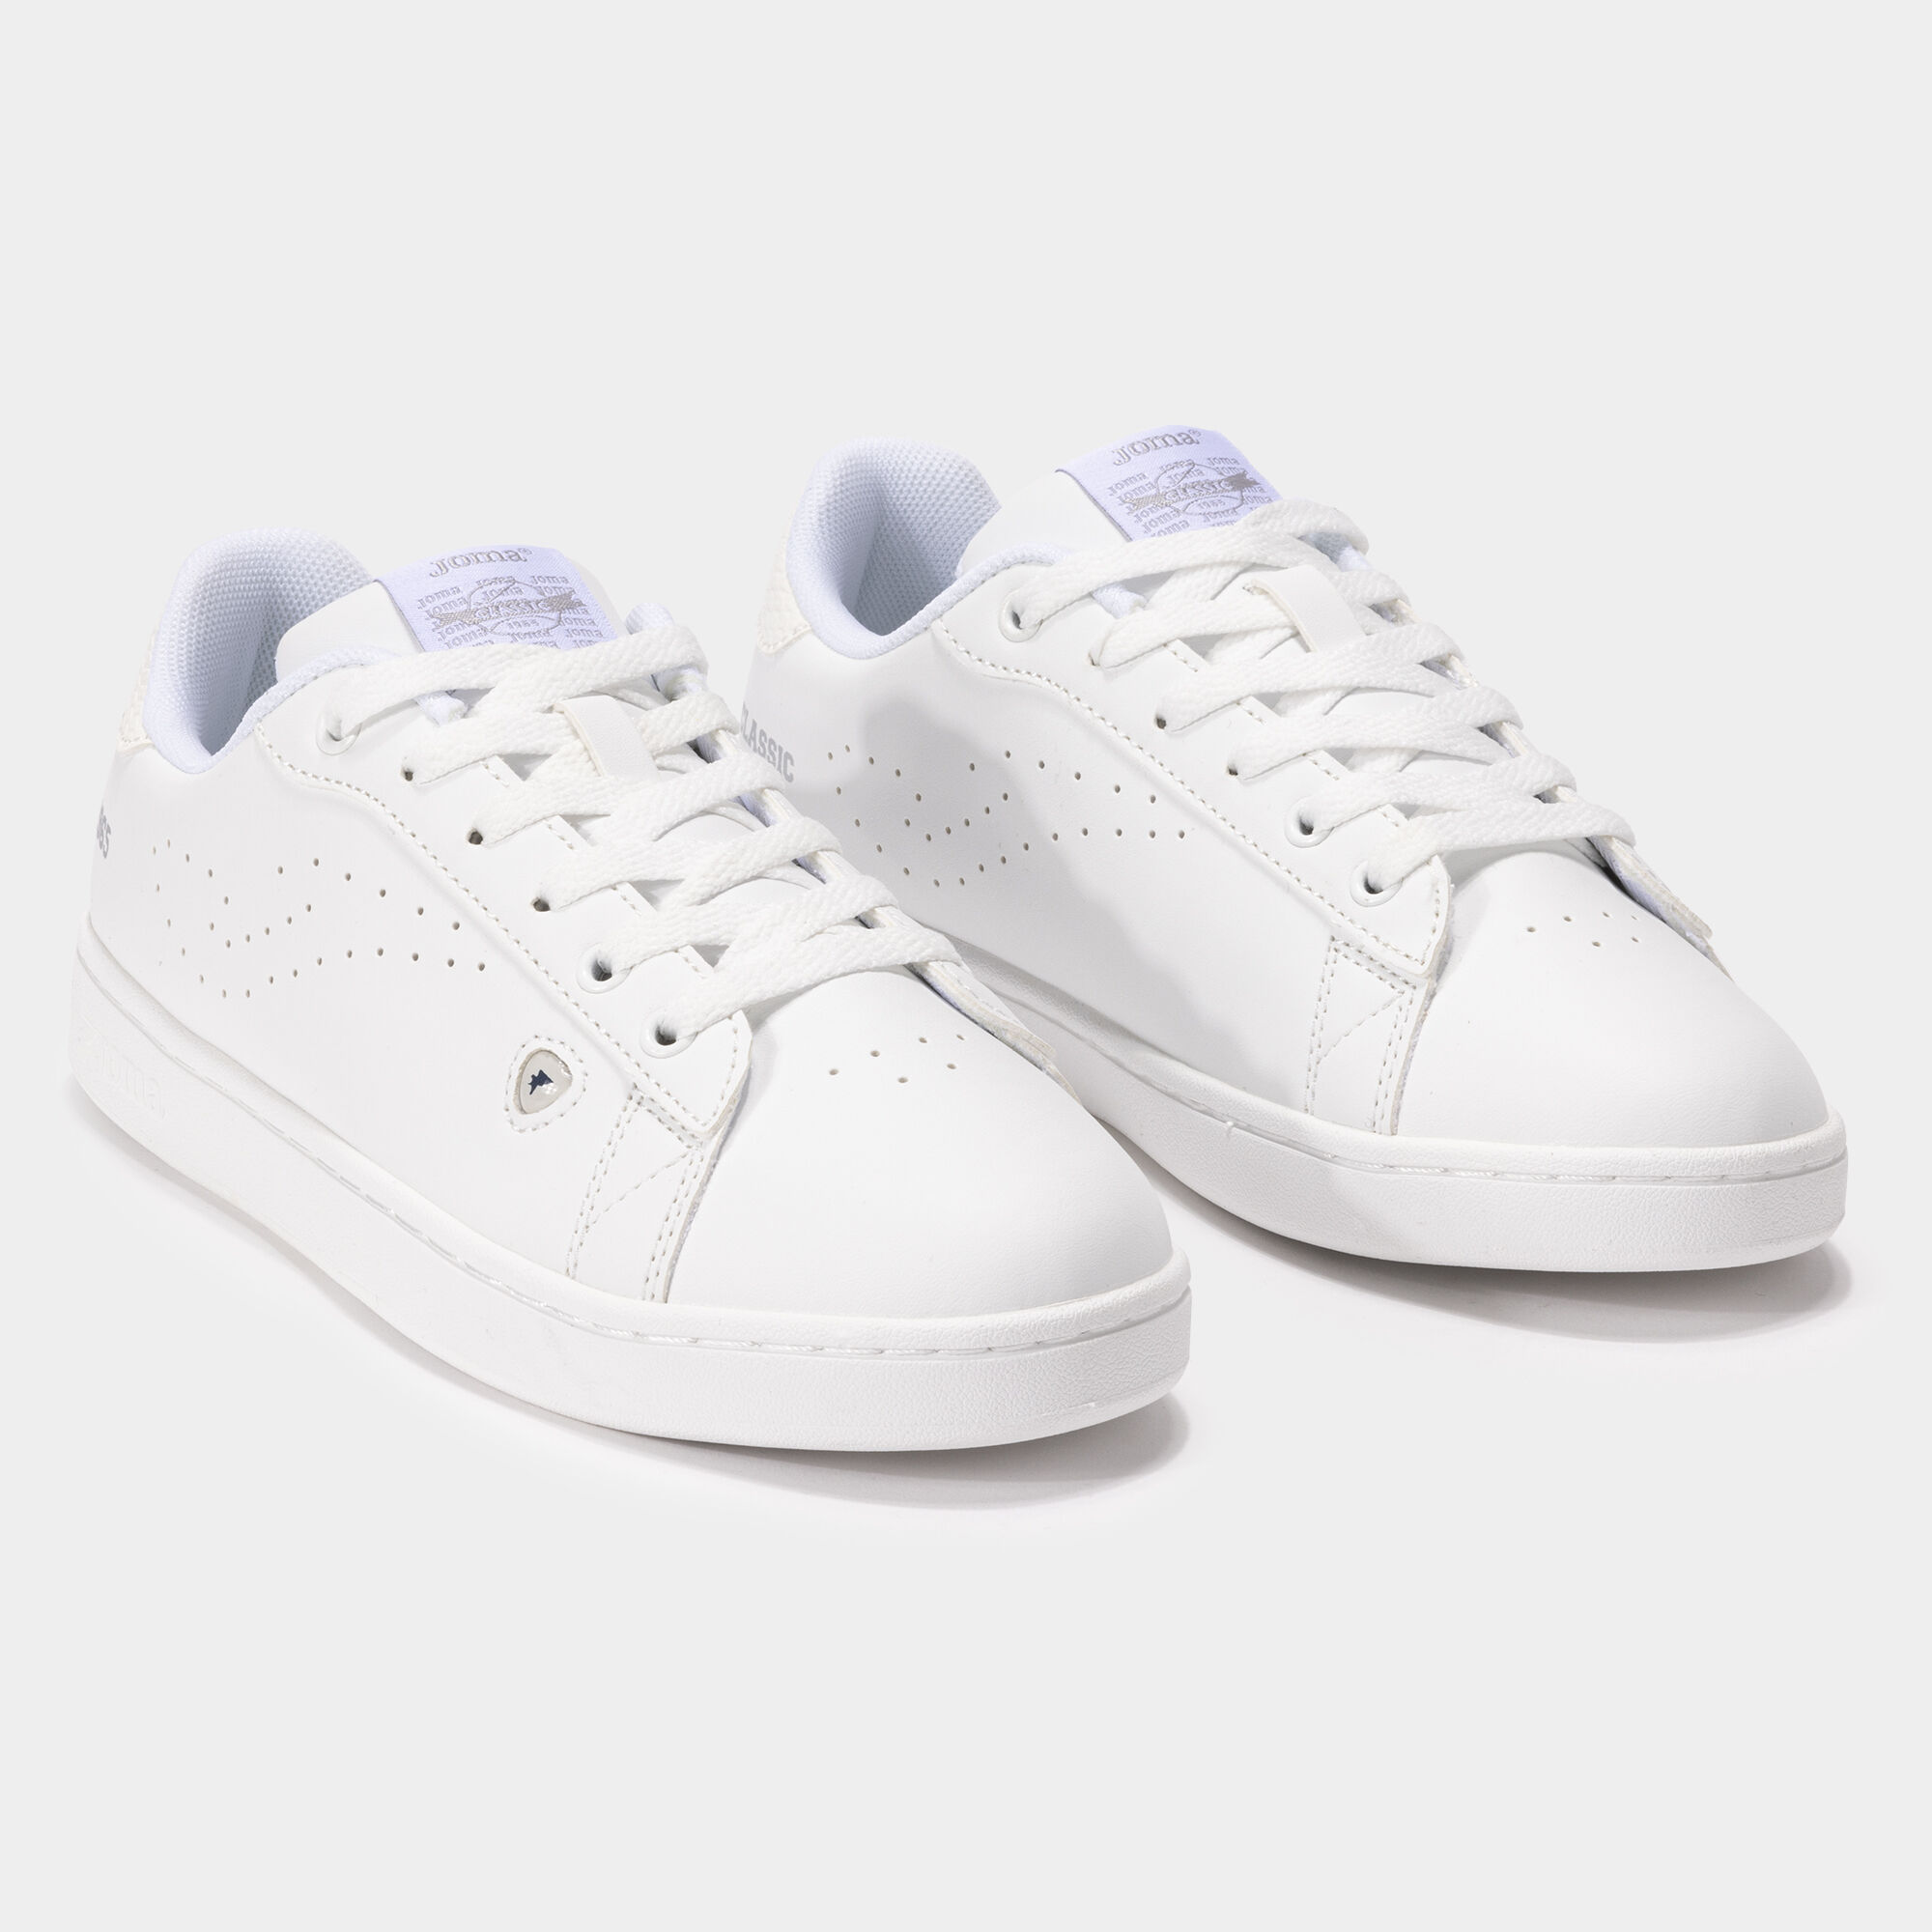 Sapatilhas casual Classic Lady 24 mulher branco